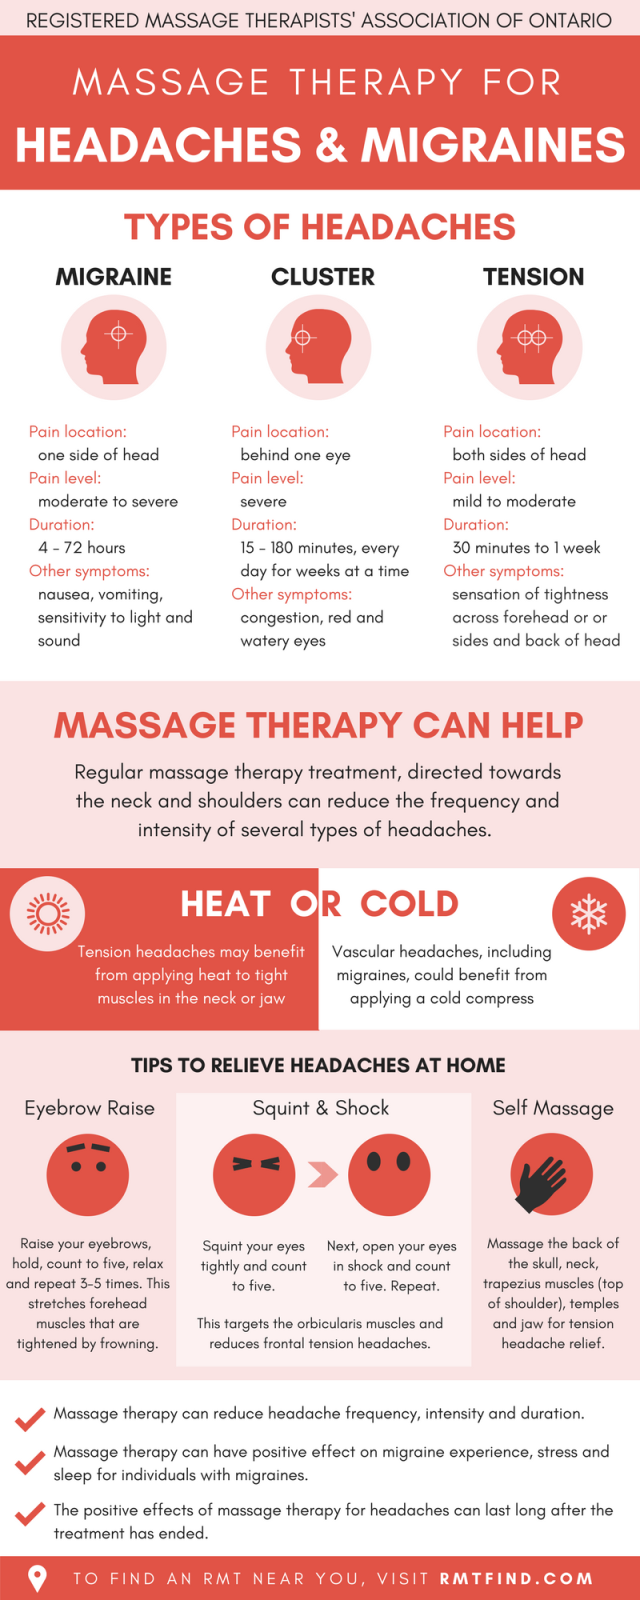 Massage Therapy for Headaches and Migranes